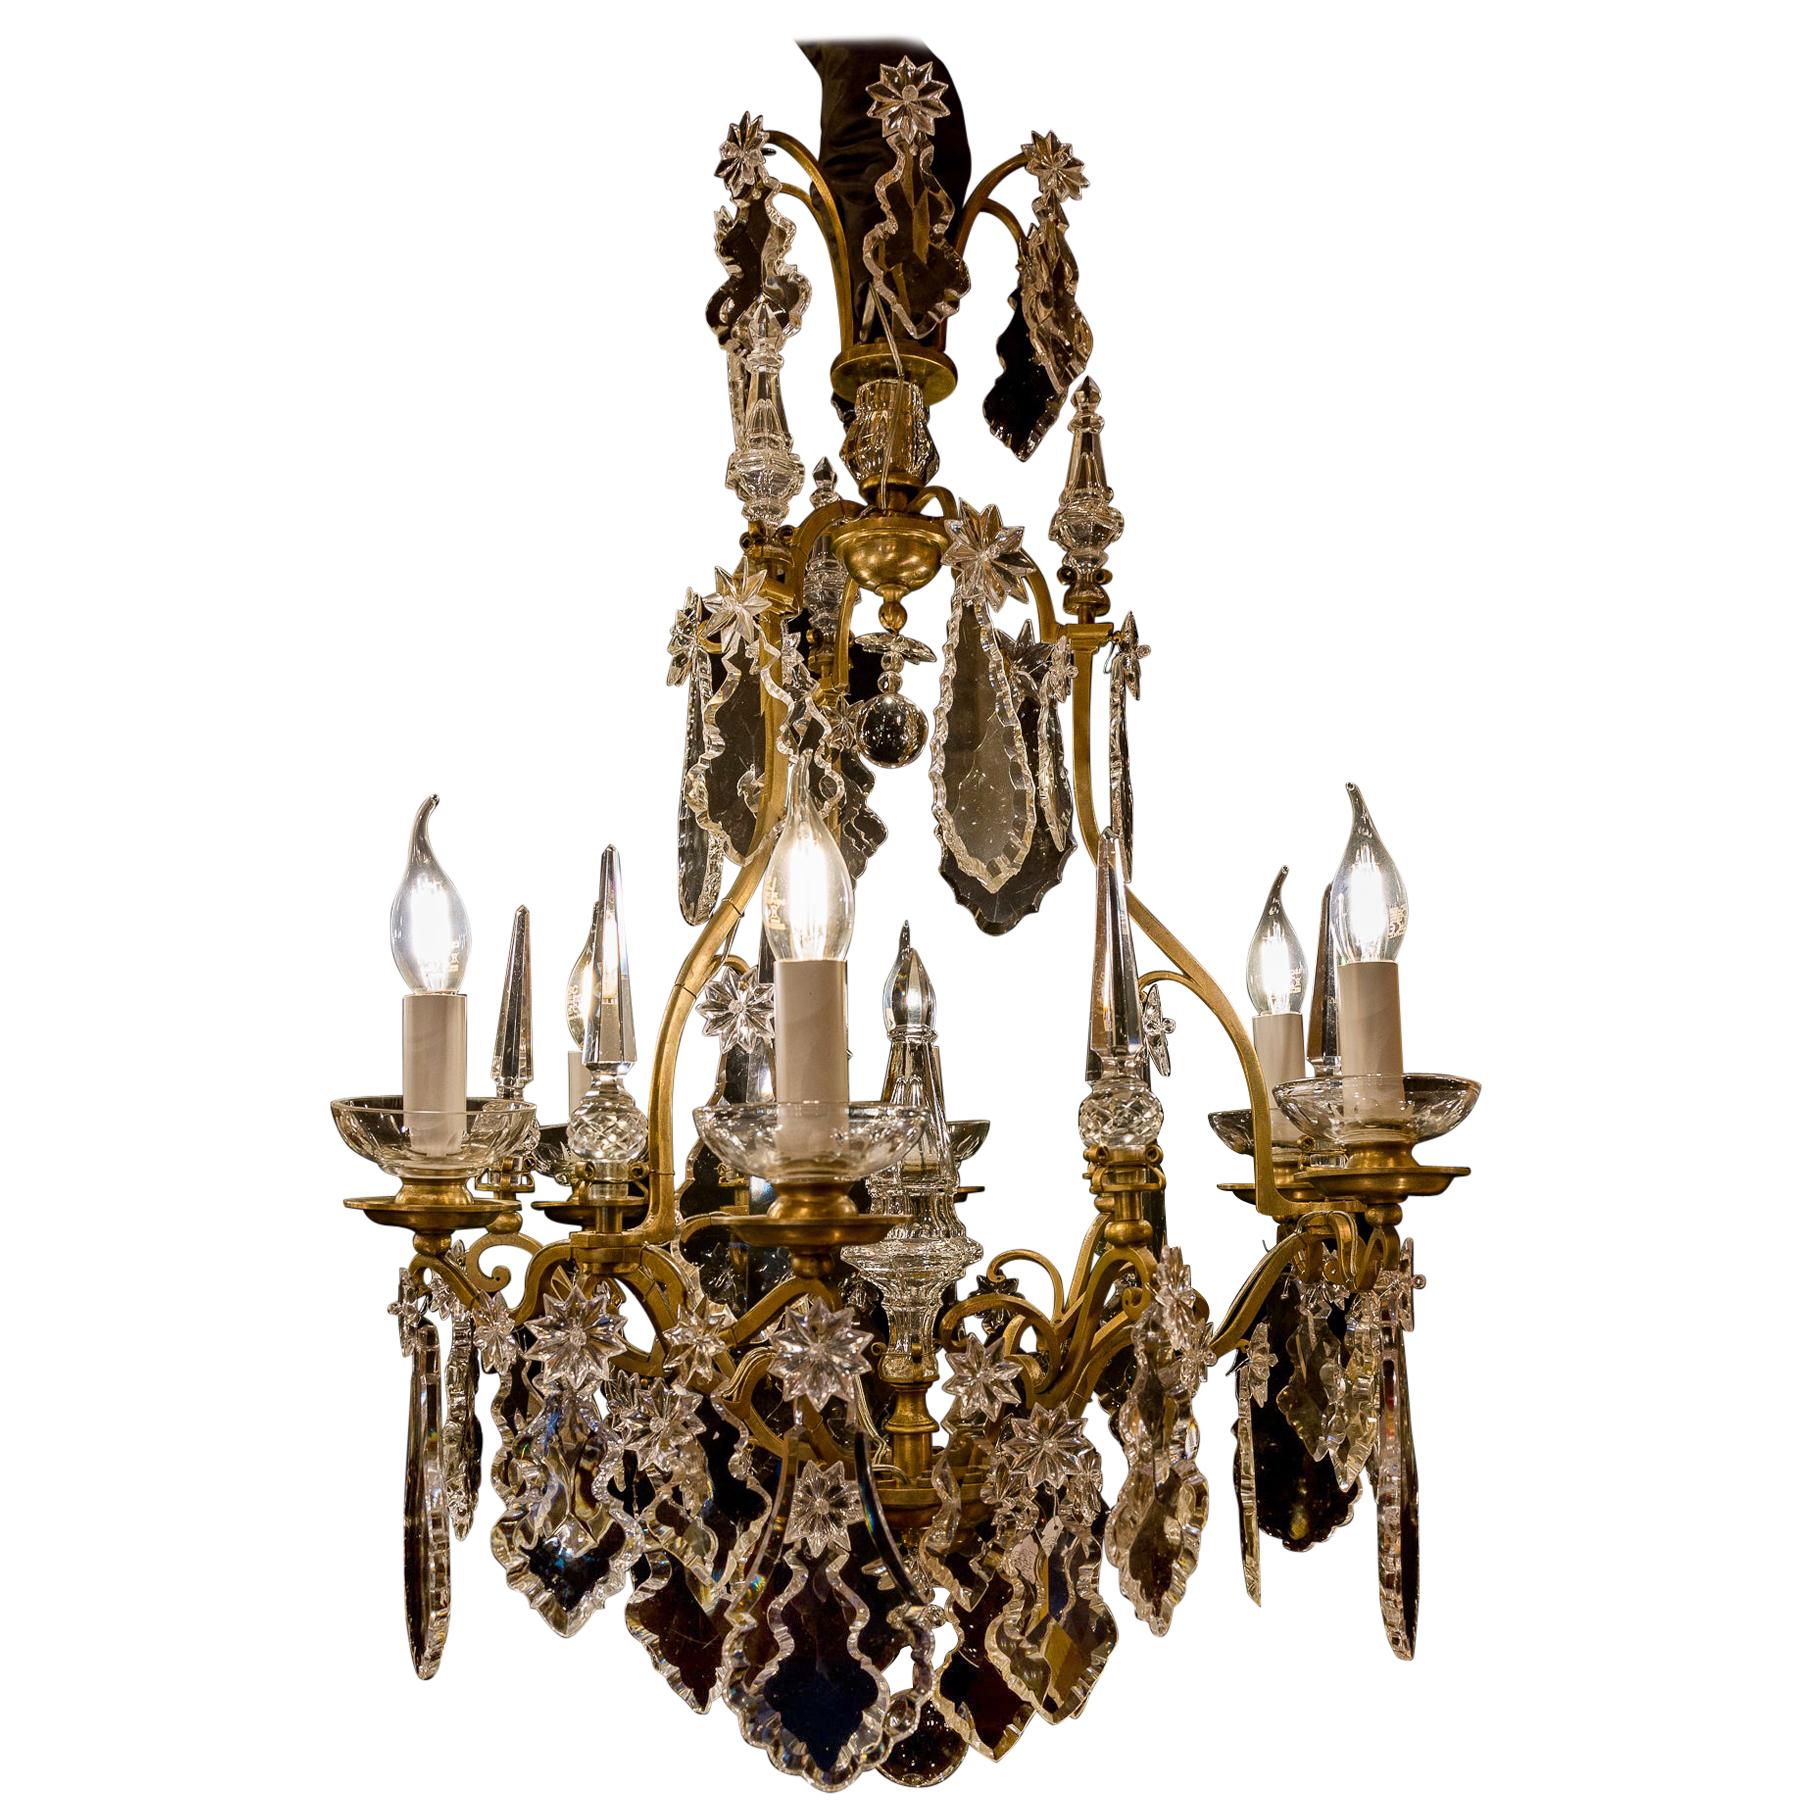 French Louis XV Style, Gilt-Bronze and Crystal Chandelier, circa 1900-1920